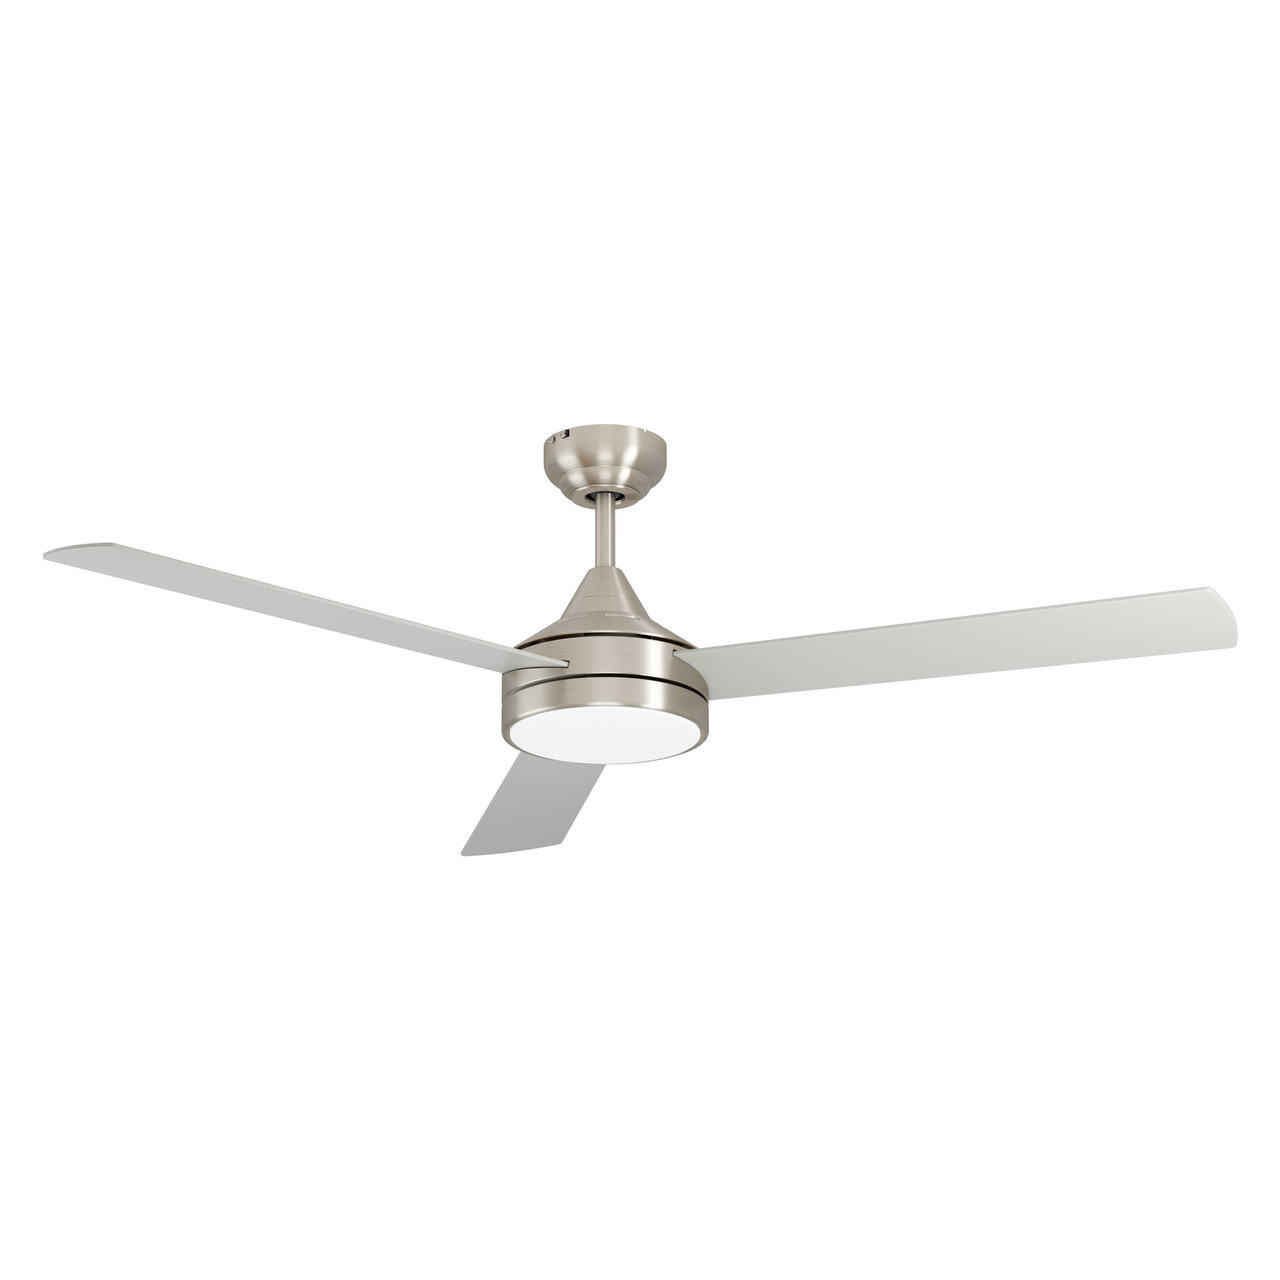 Sisimbra Satin Nickel with Remote Control Ceiling Fan and Light